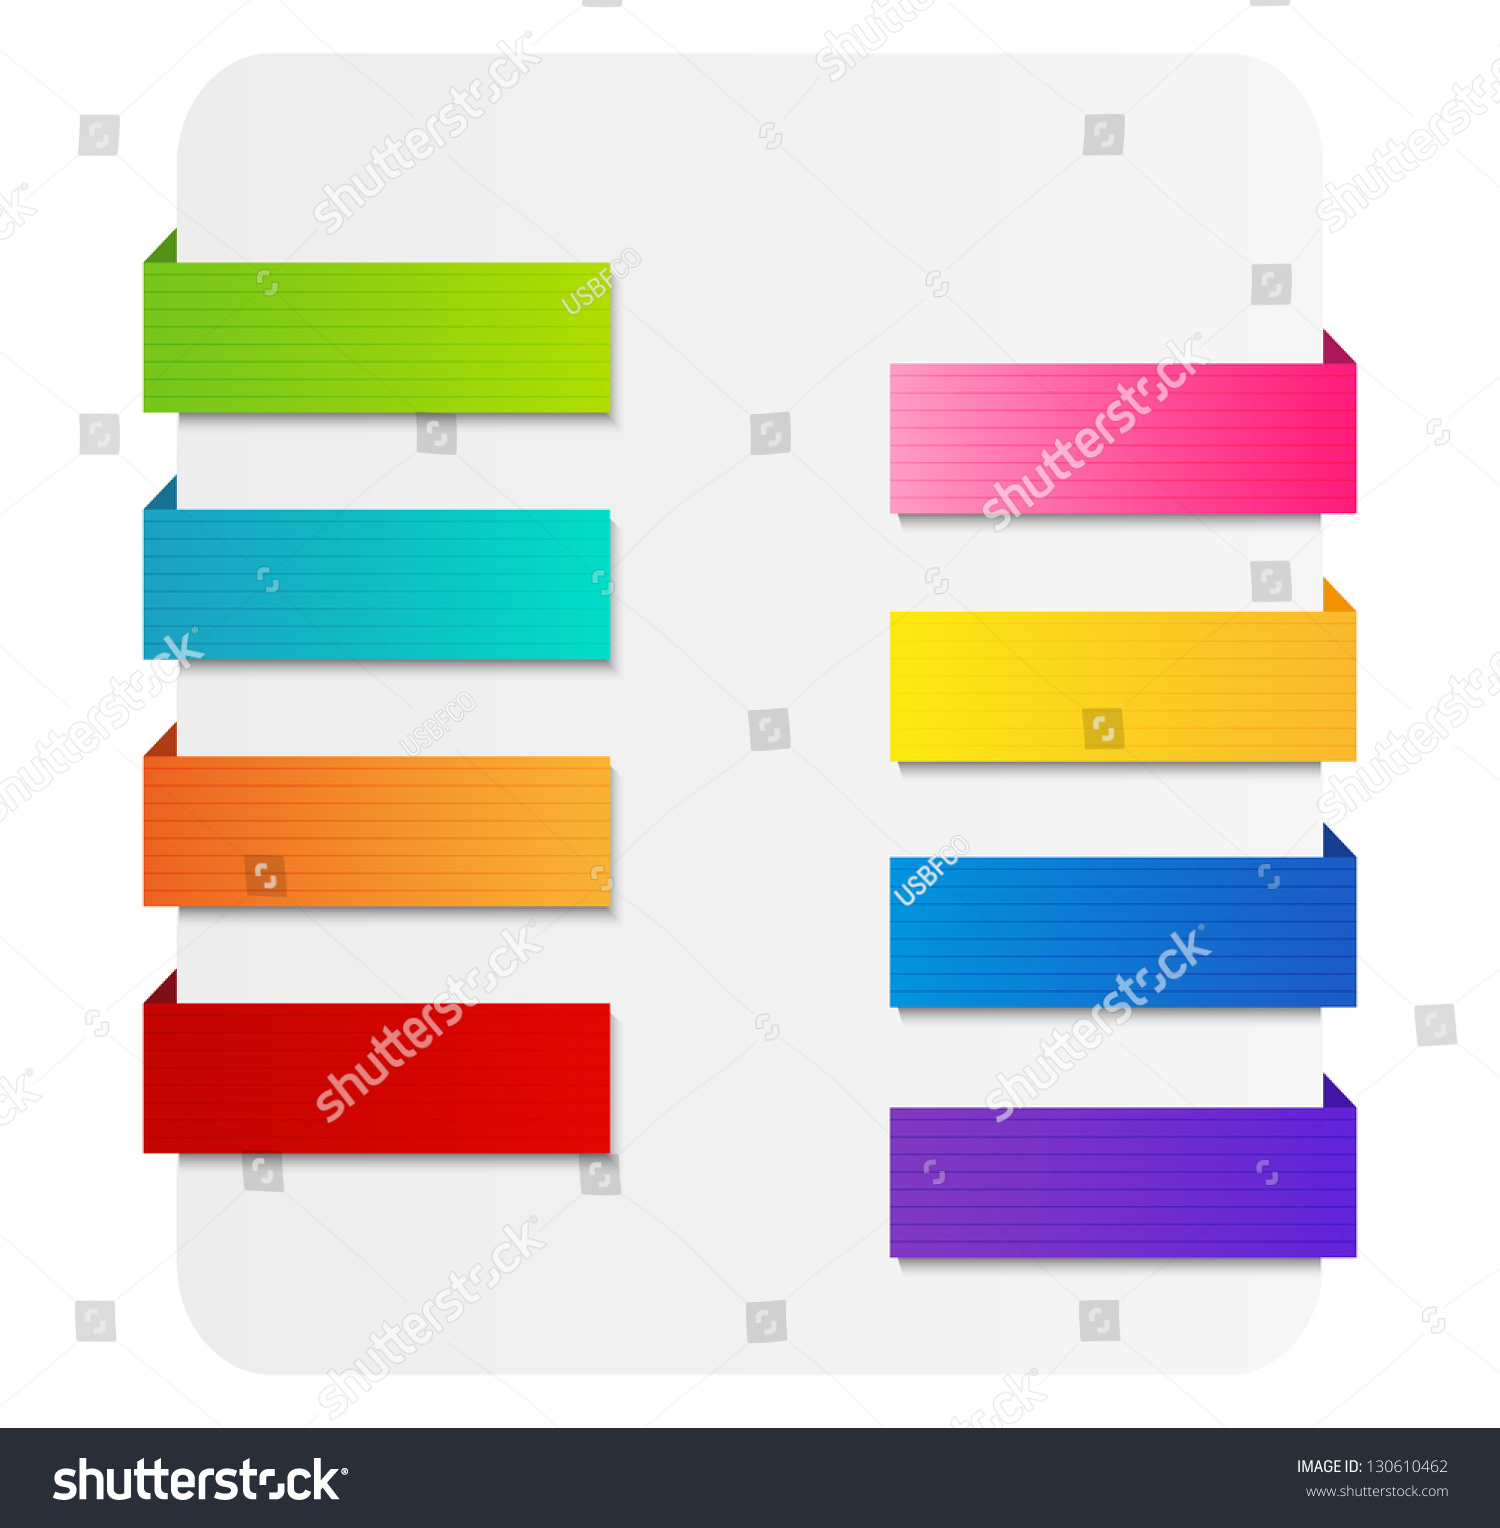 Set Of Color Paper Ribbons Stock Vector Illustration 130610462 ...